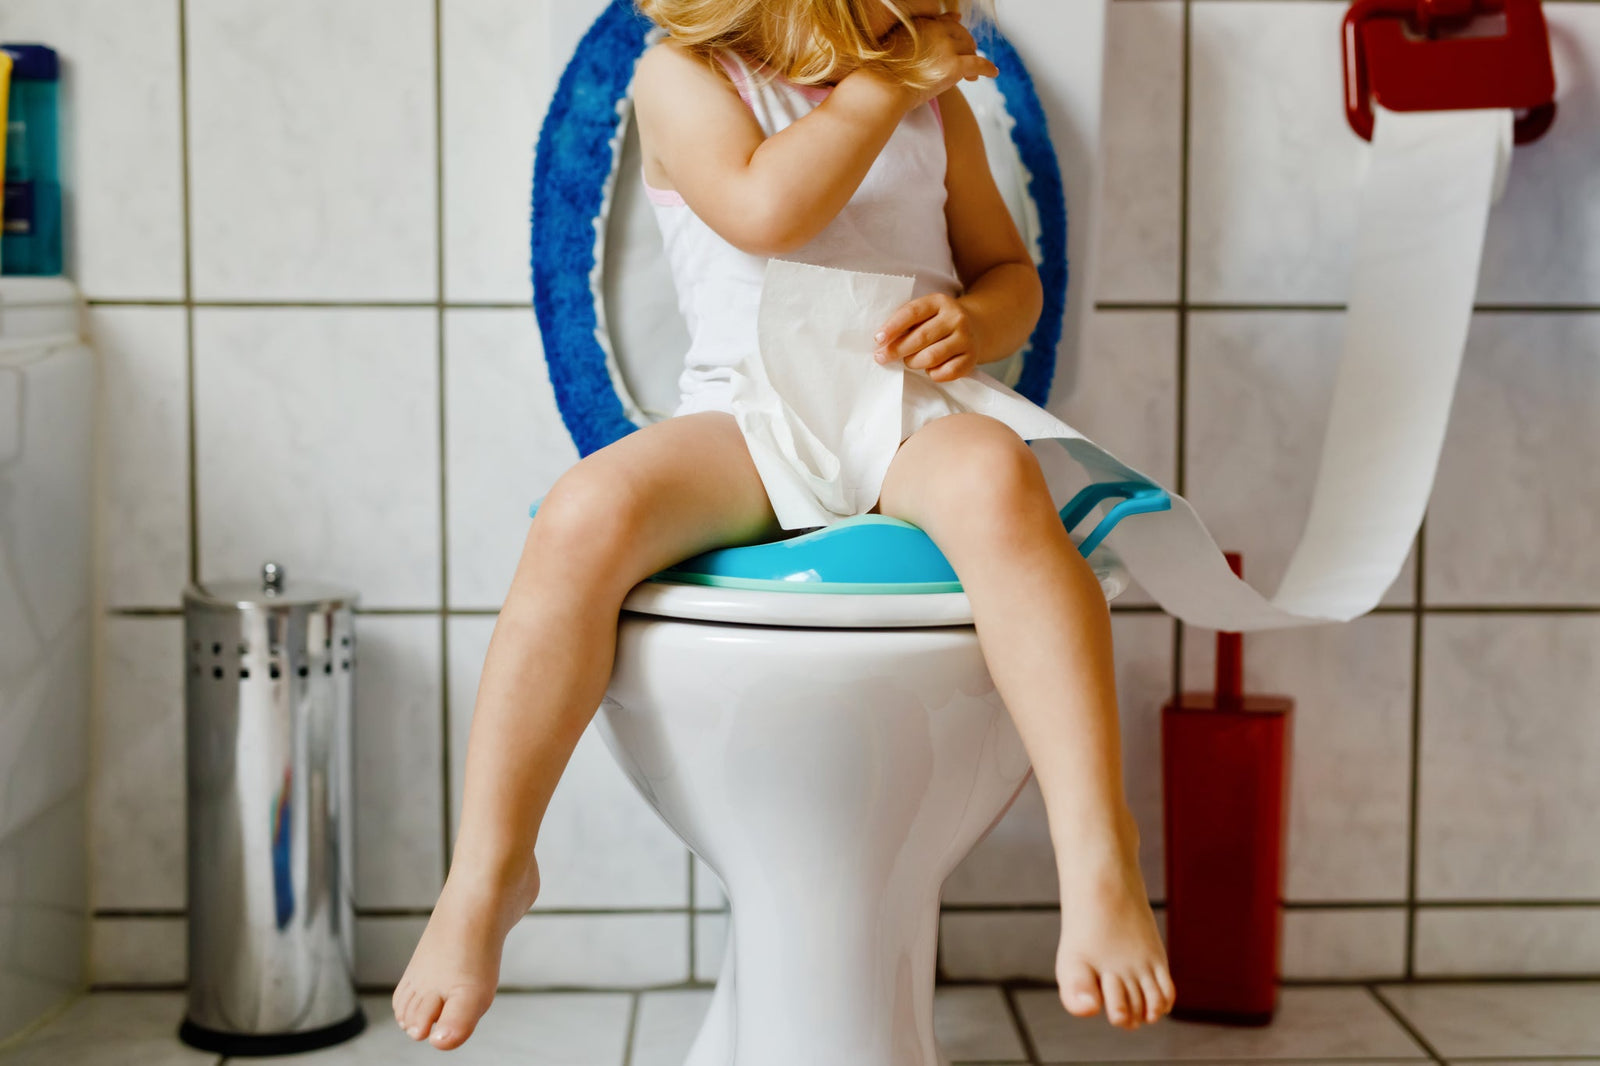 Young child sitting on a toilet as she learns to use the toilet